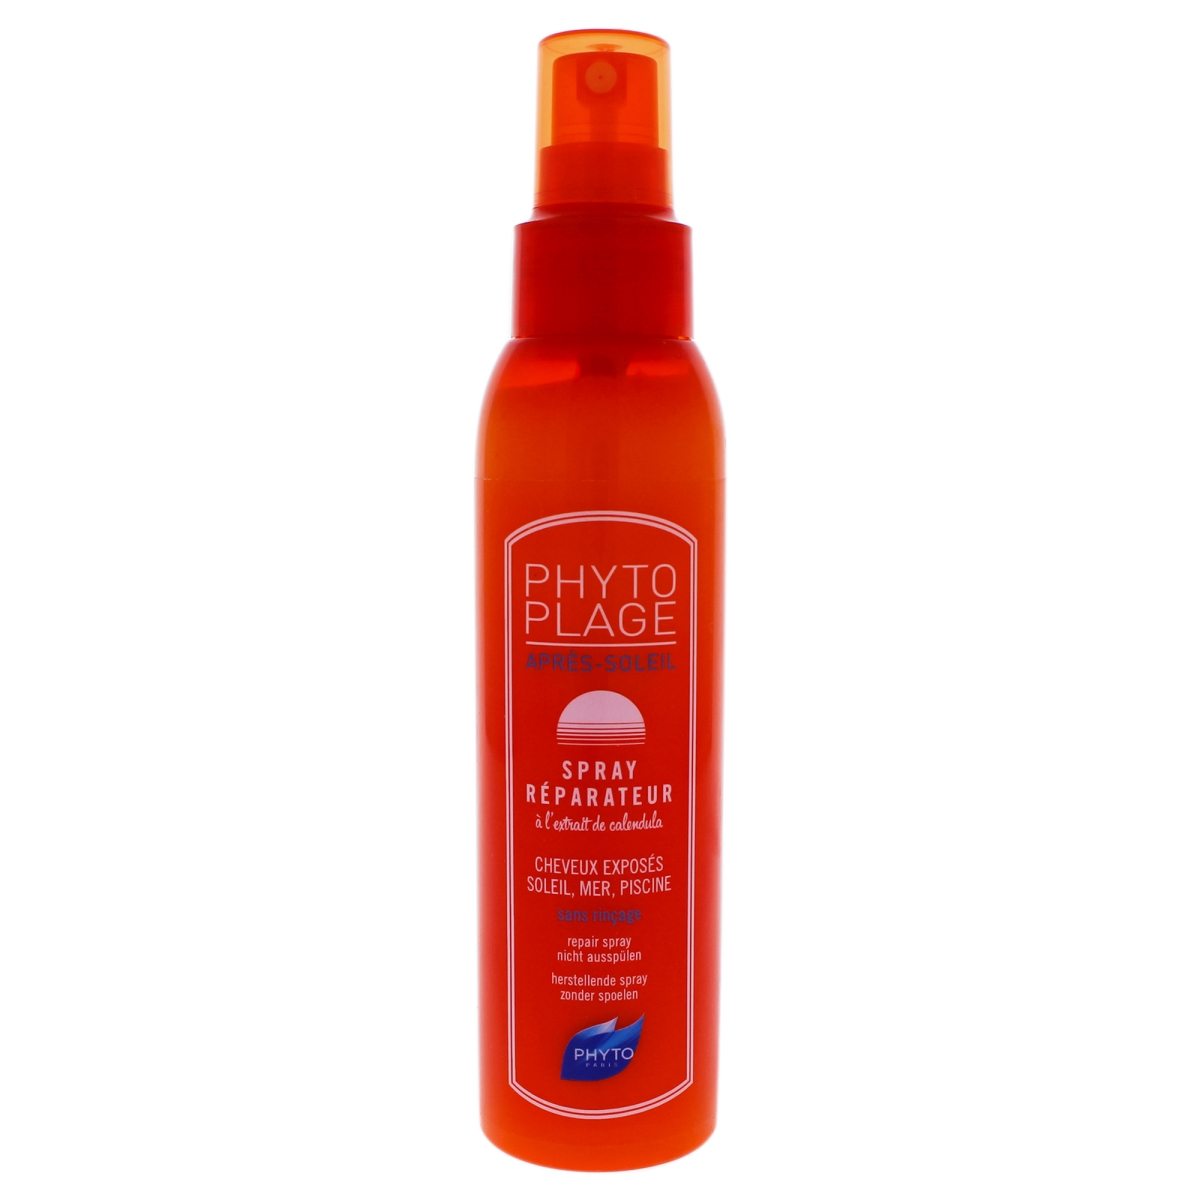 I0088732 Phytoplage After-sun Repairing Spray For Unisex - 4.22 Oz